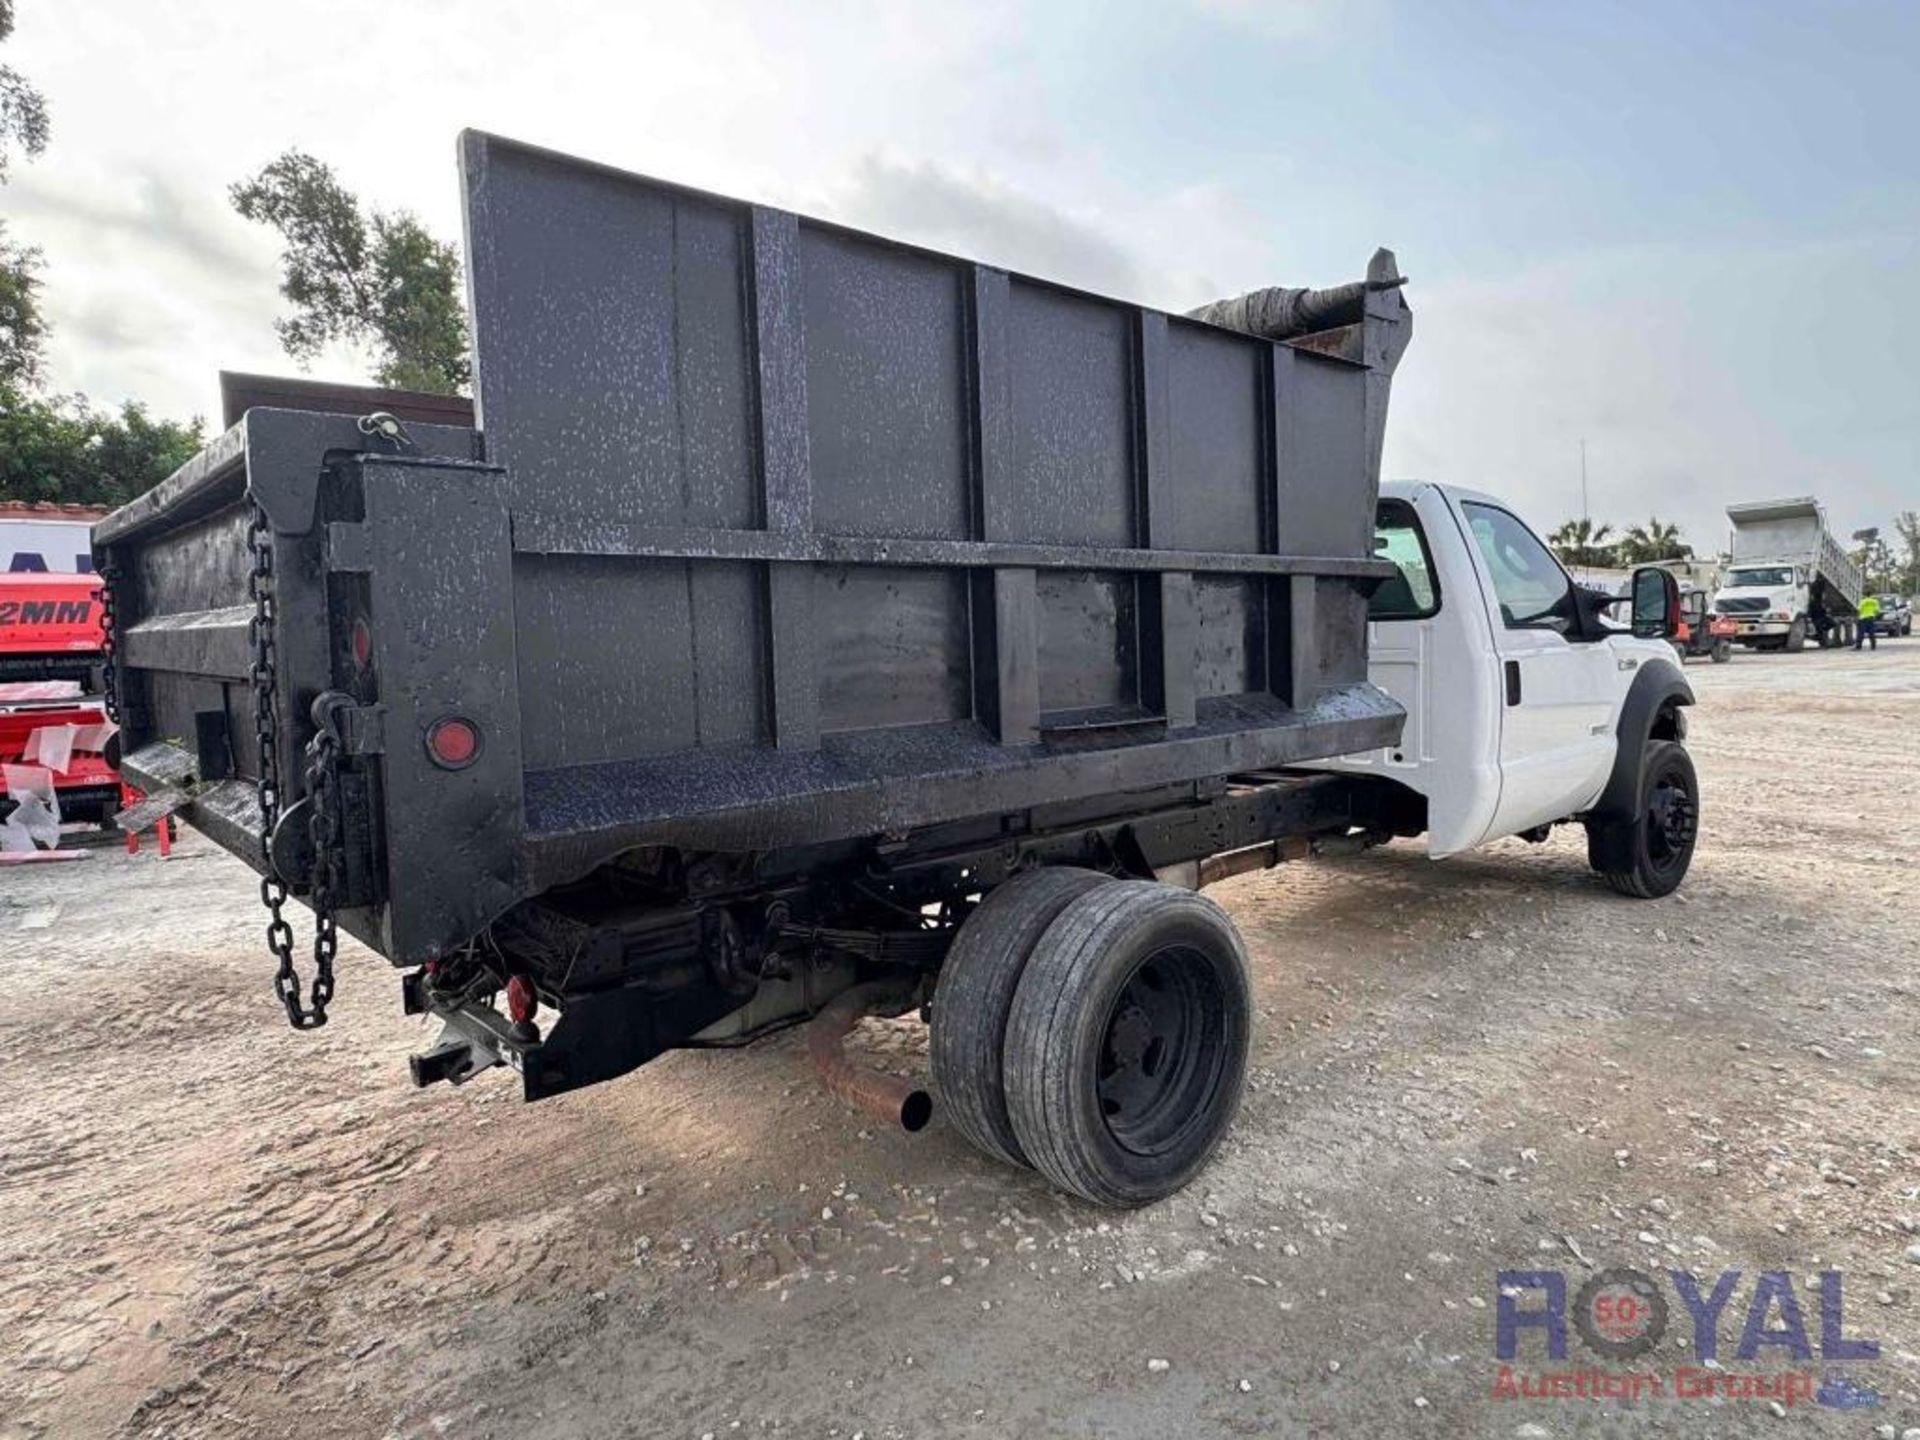 2006 Ford F450 S/A Dump Truck - Image 3 of 26